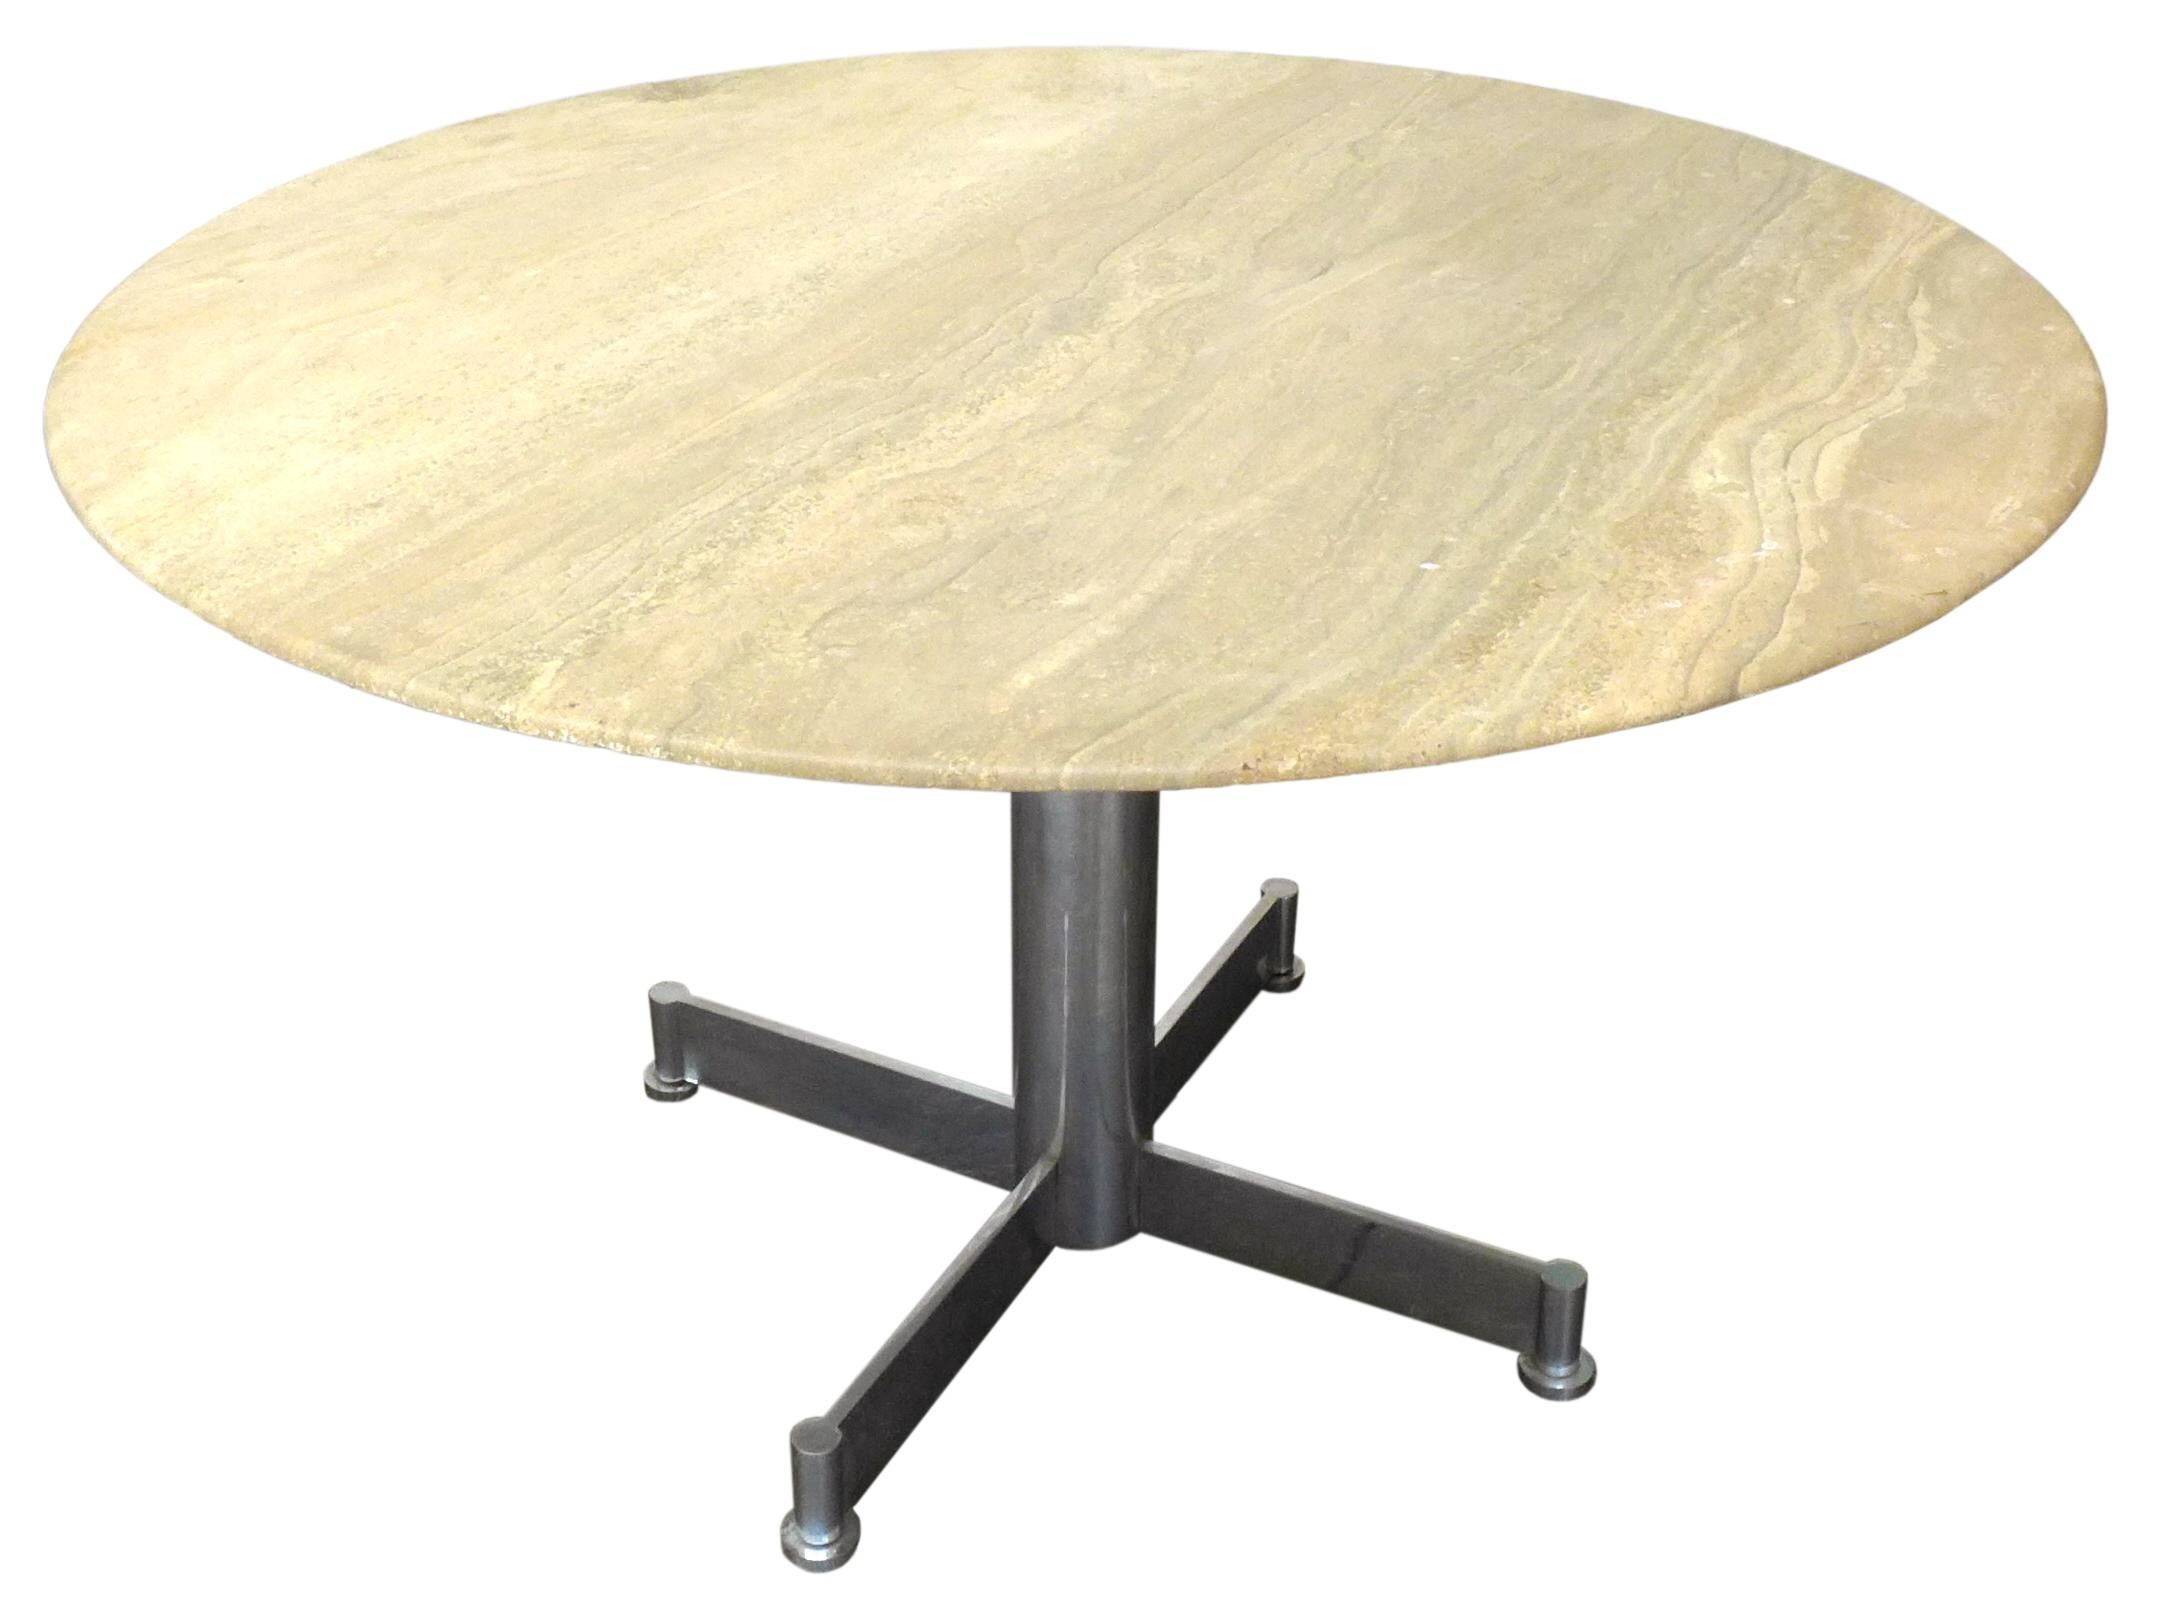 A handsome, round dining table in travertine and chromed steel.
Pedestal base features machined, adjustable pod feet. Table top in a classic travertine oatmeal hue wearing wonderful grain and a subtle underside bevel. Great scale and mix of